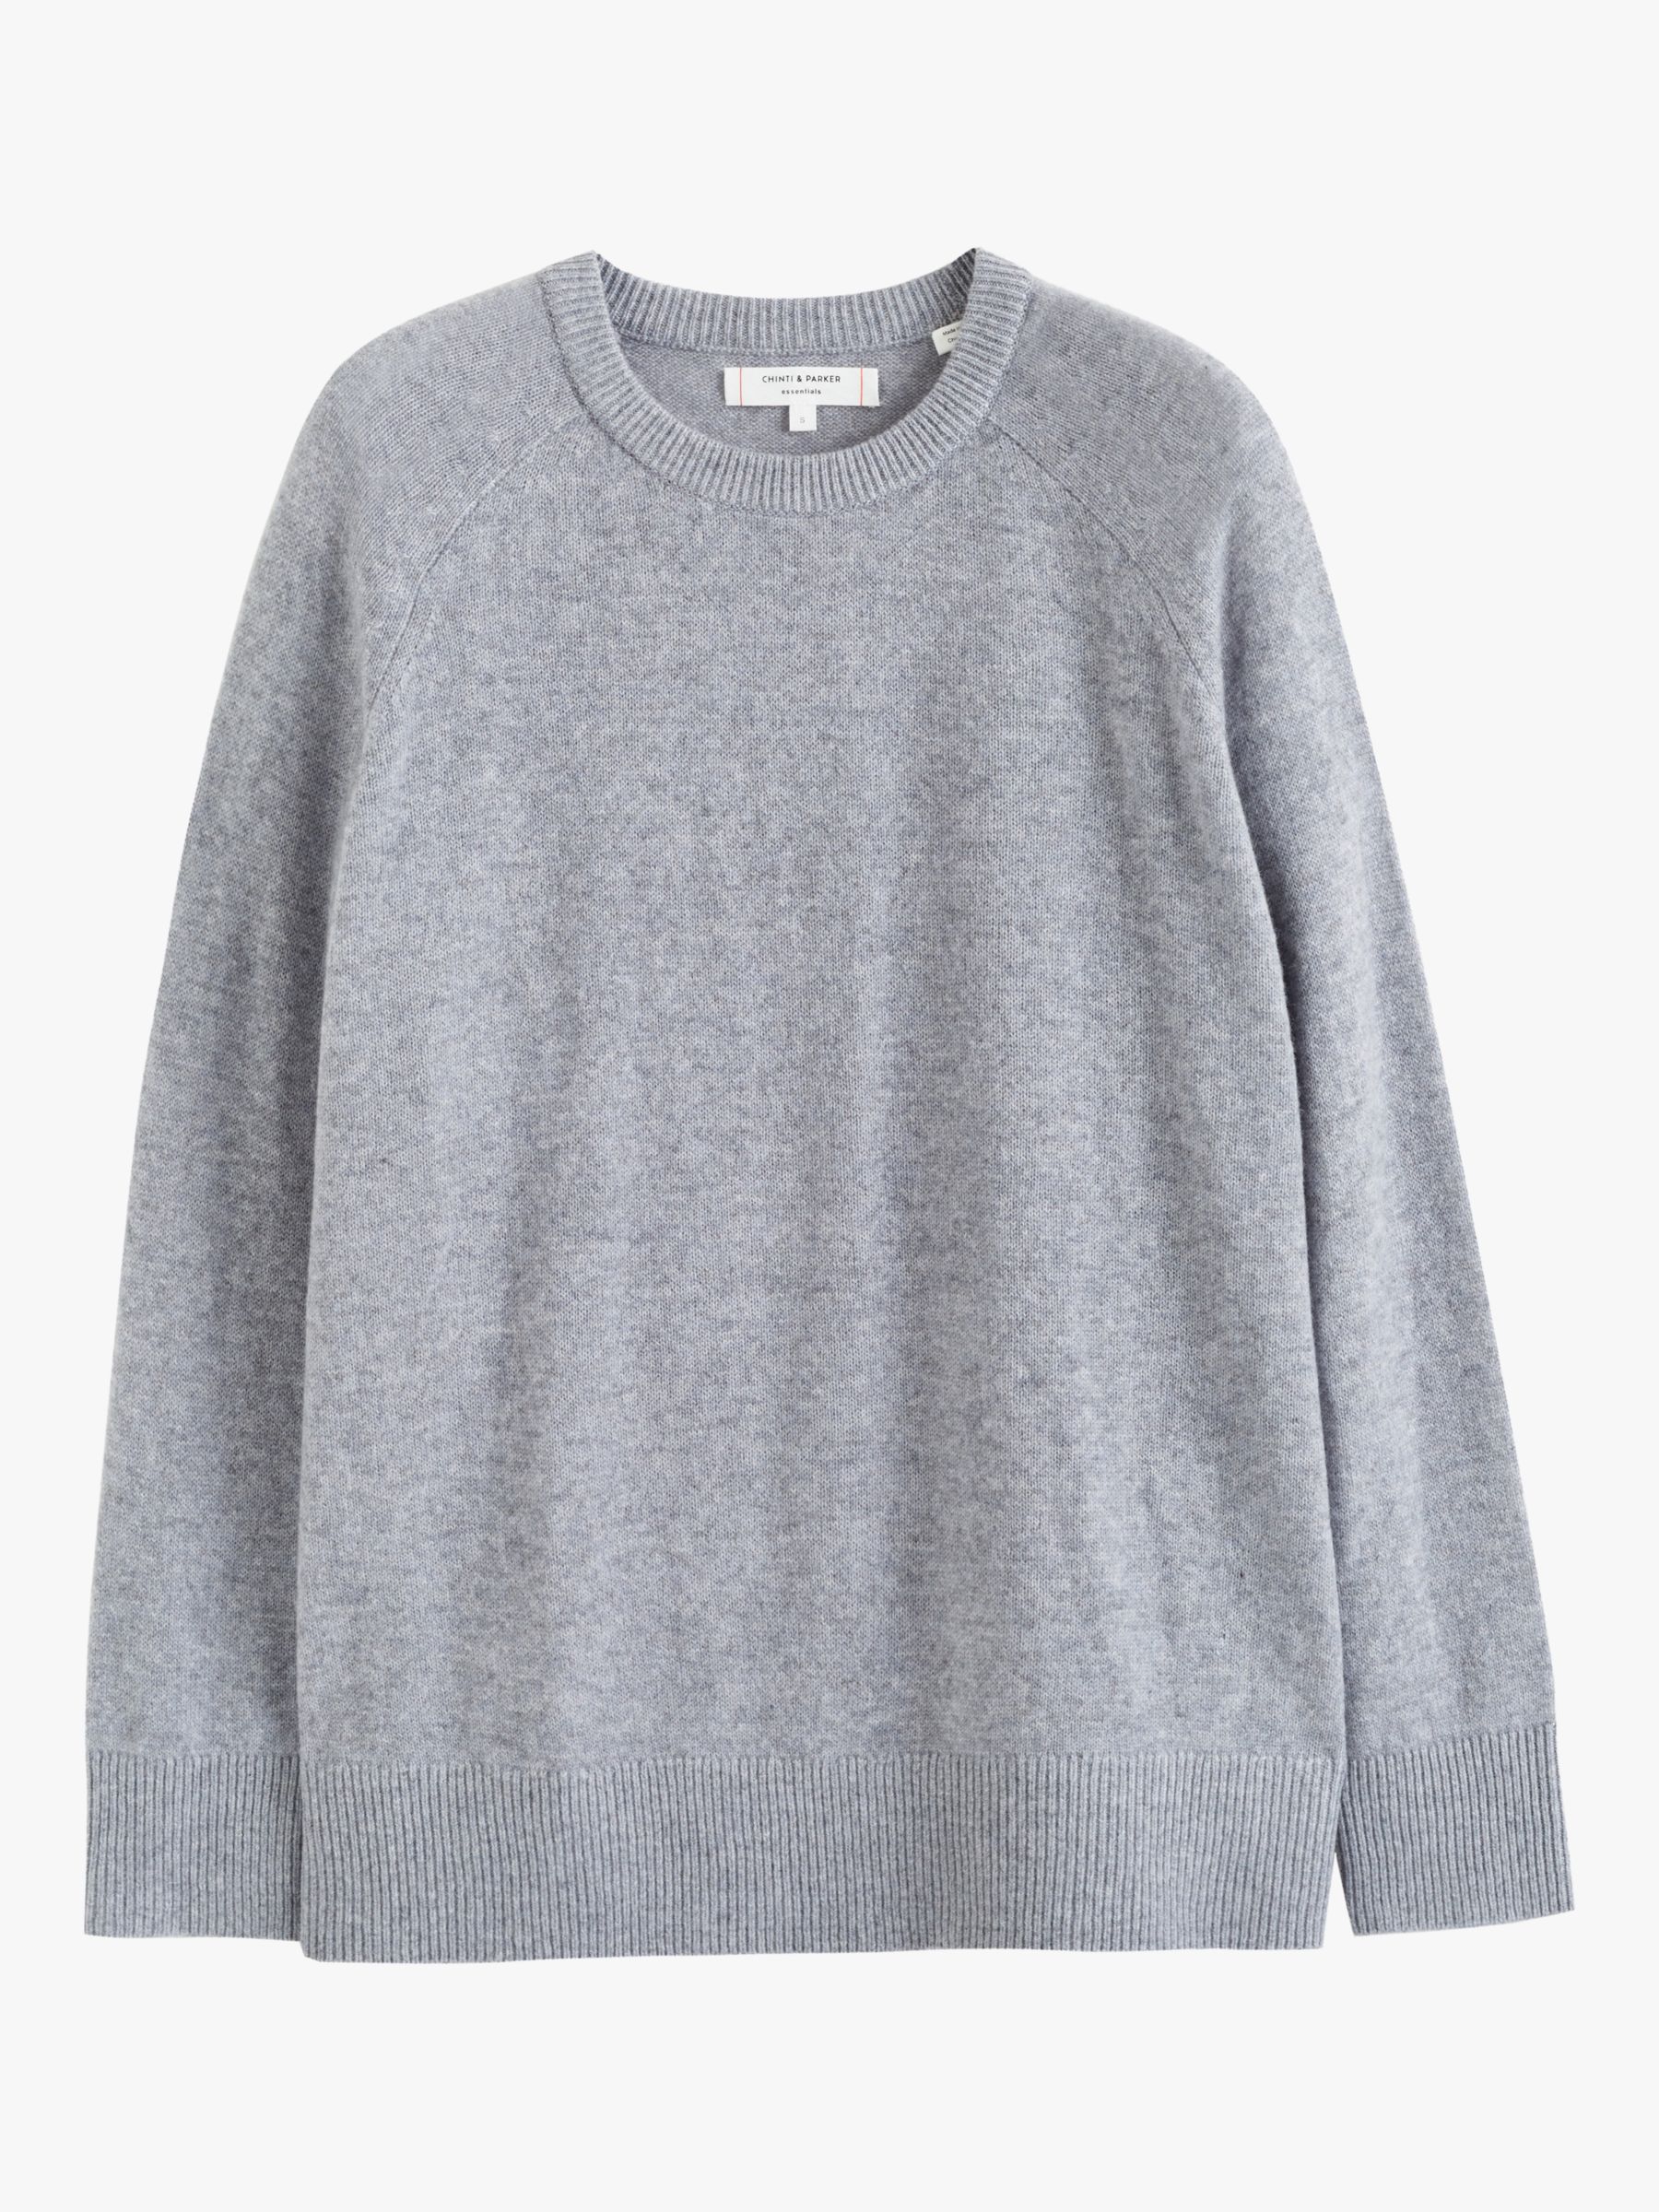 Buy Chinti & Parker Cashmere Slouchy Jumper Online at johnlewis.com